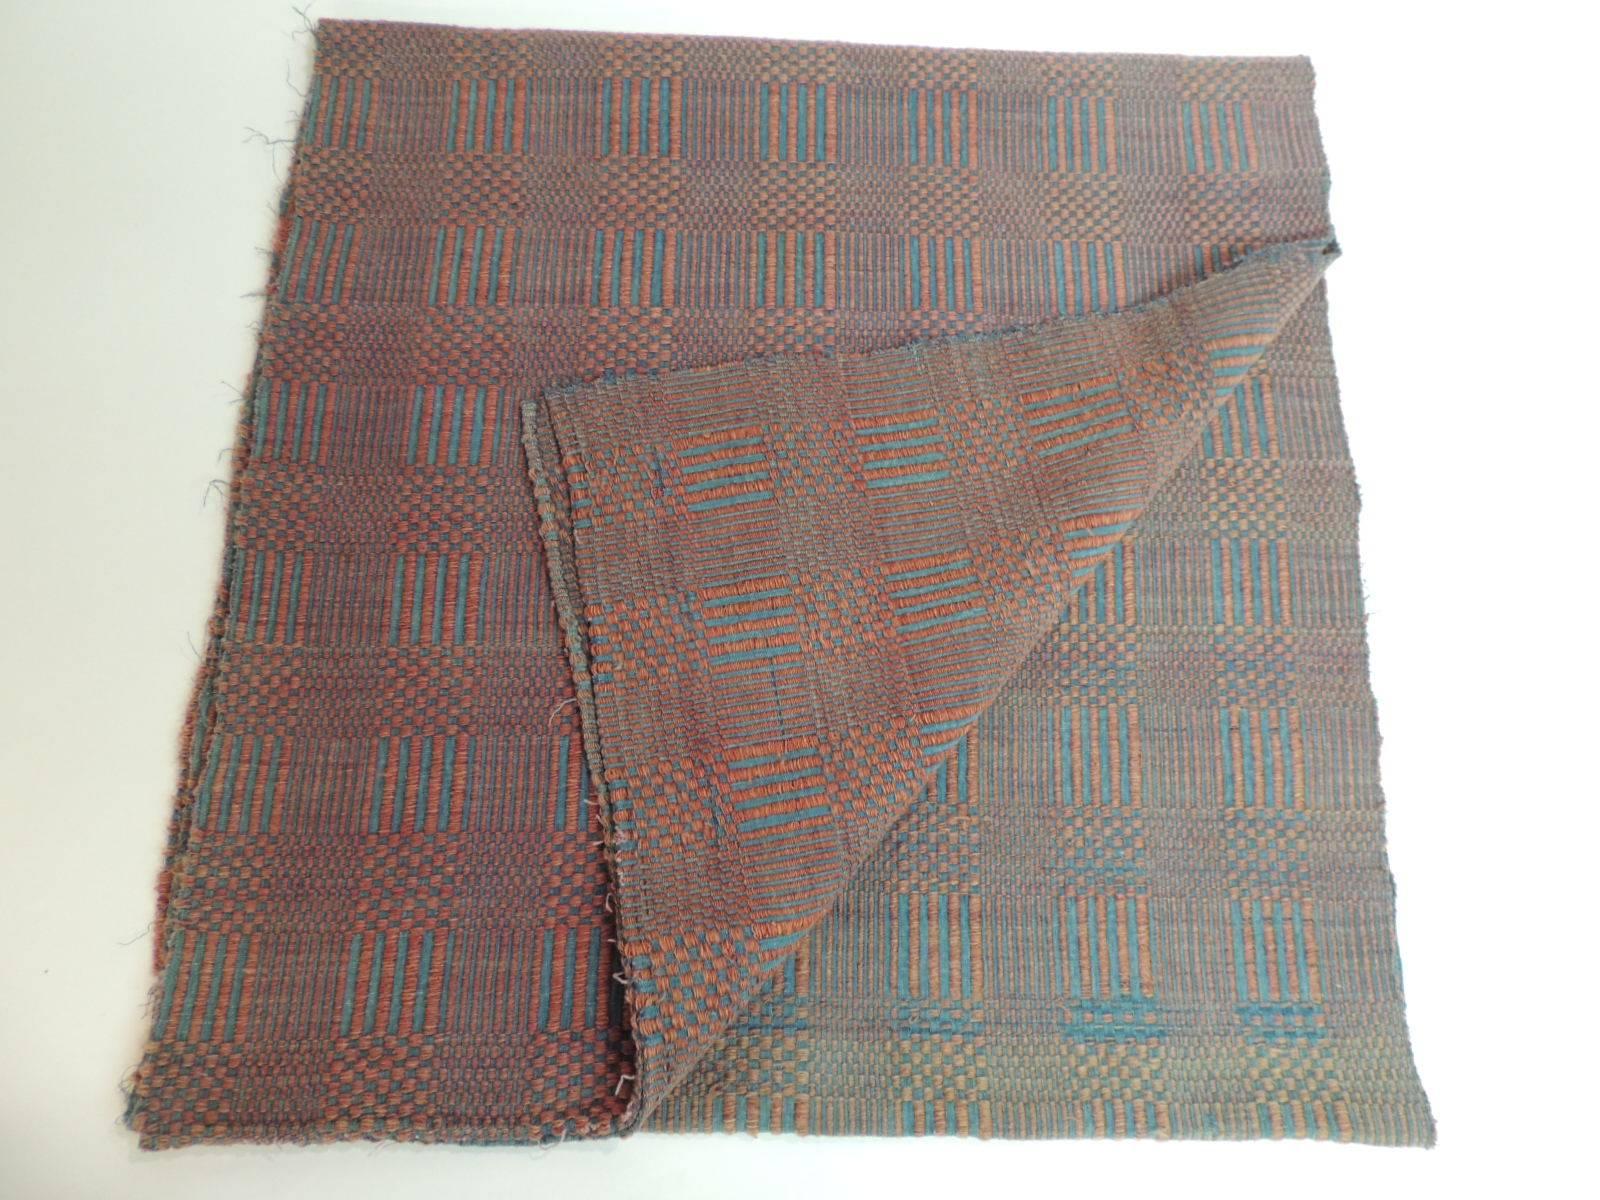 Vintage flat-woven Americana carpet runner/Rug
Americana flat basket weave rustic runner. Antique carpet runner: woven threads in shades of blue and red undertones. Finish on all edges. No stains in the runner nor any shredding.
Size: 27